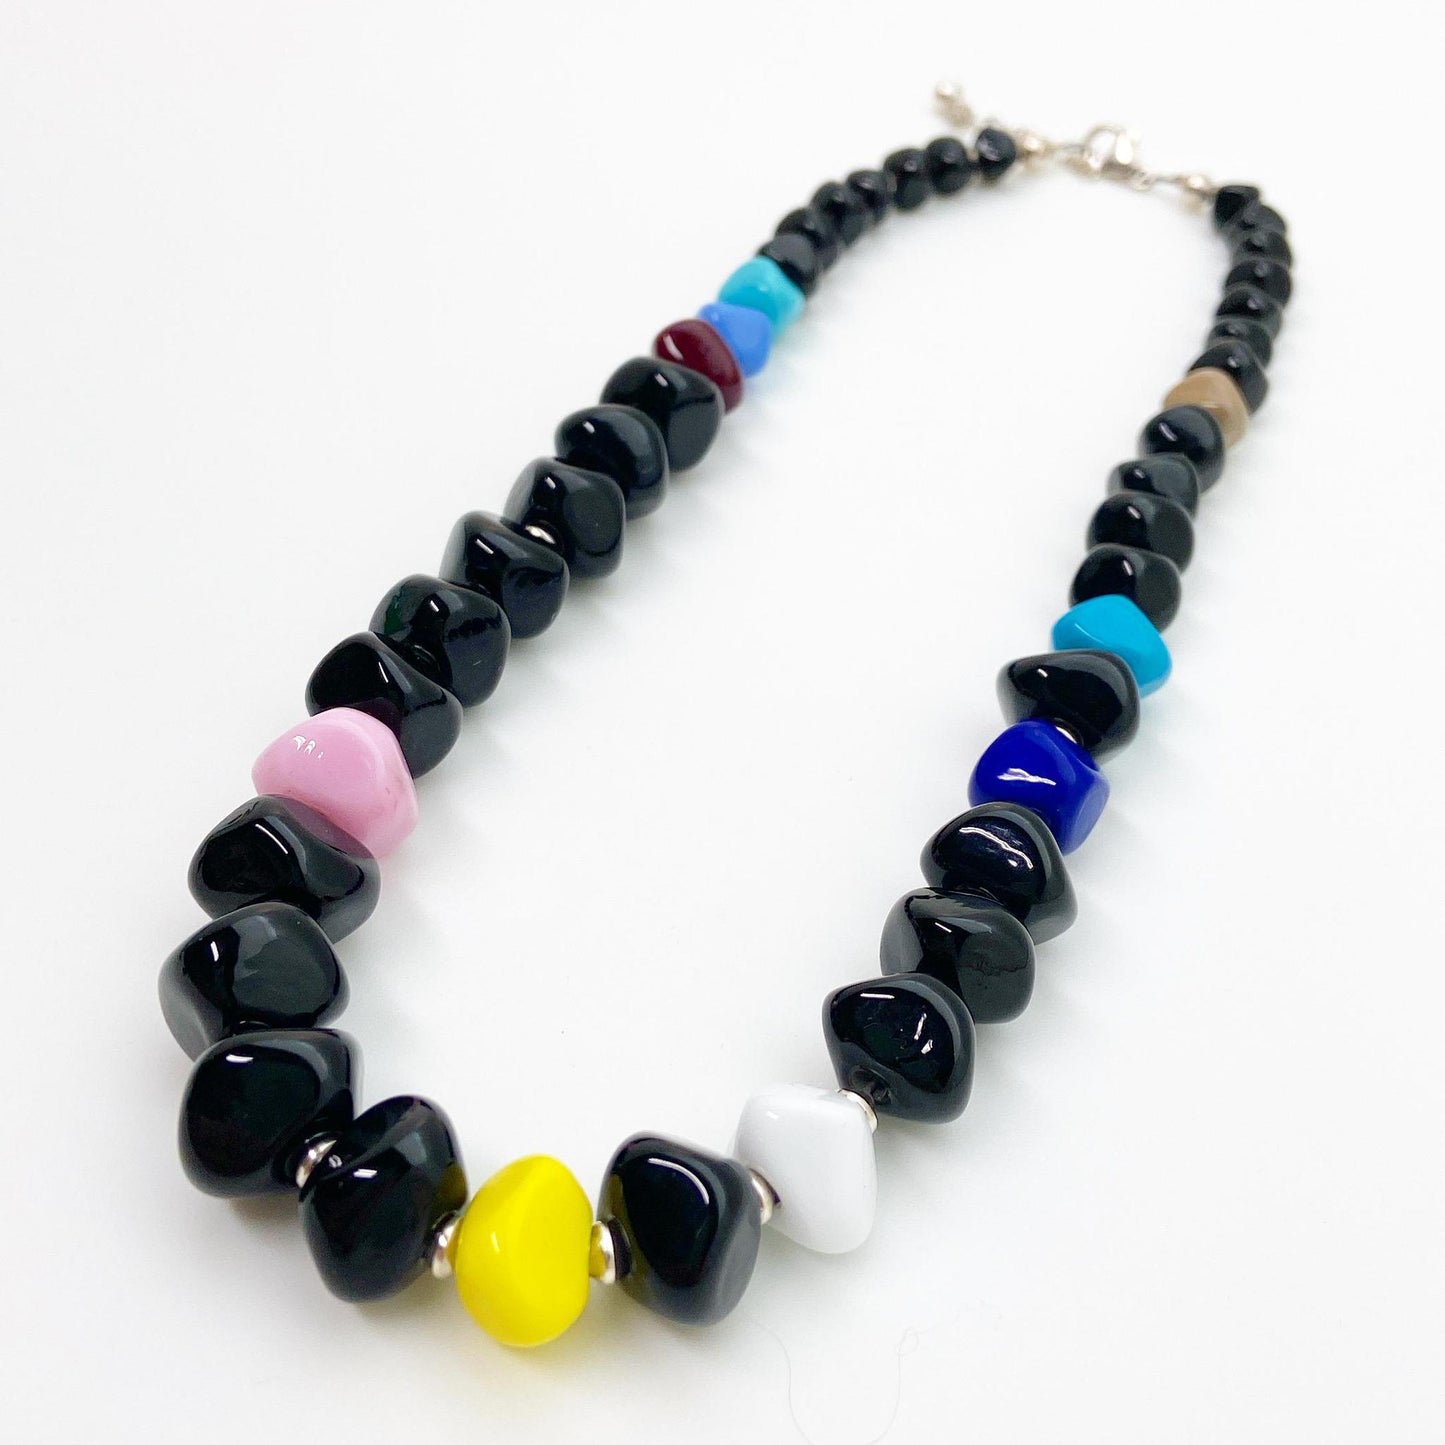 Necklace - Geometric Glass Beads - Black with Mixed Colors